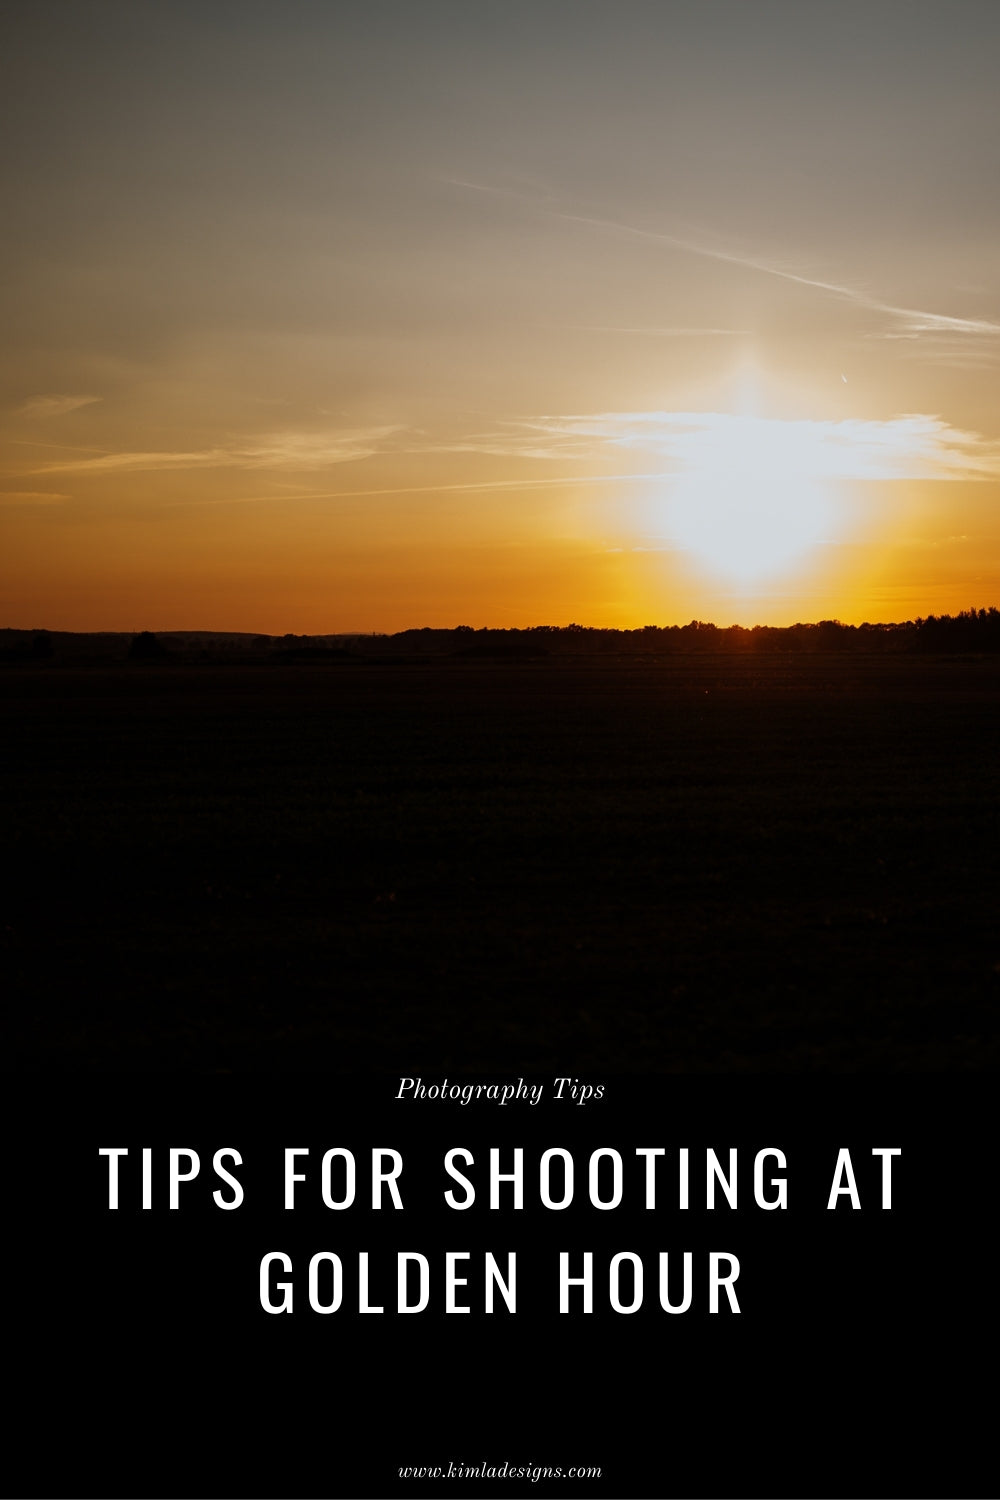 Tips for Shooting at Golden Hour